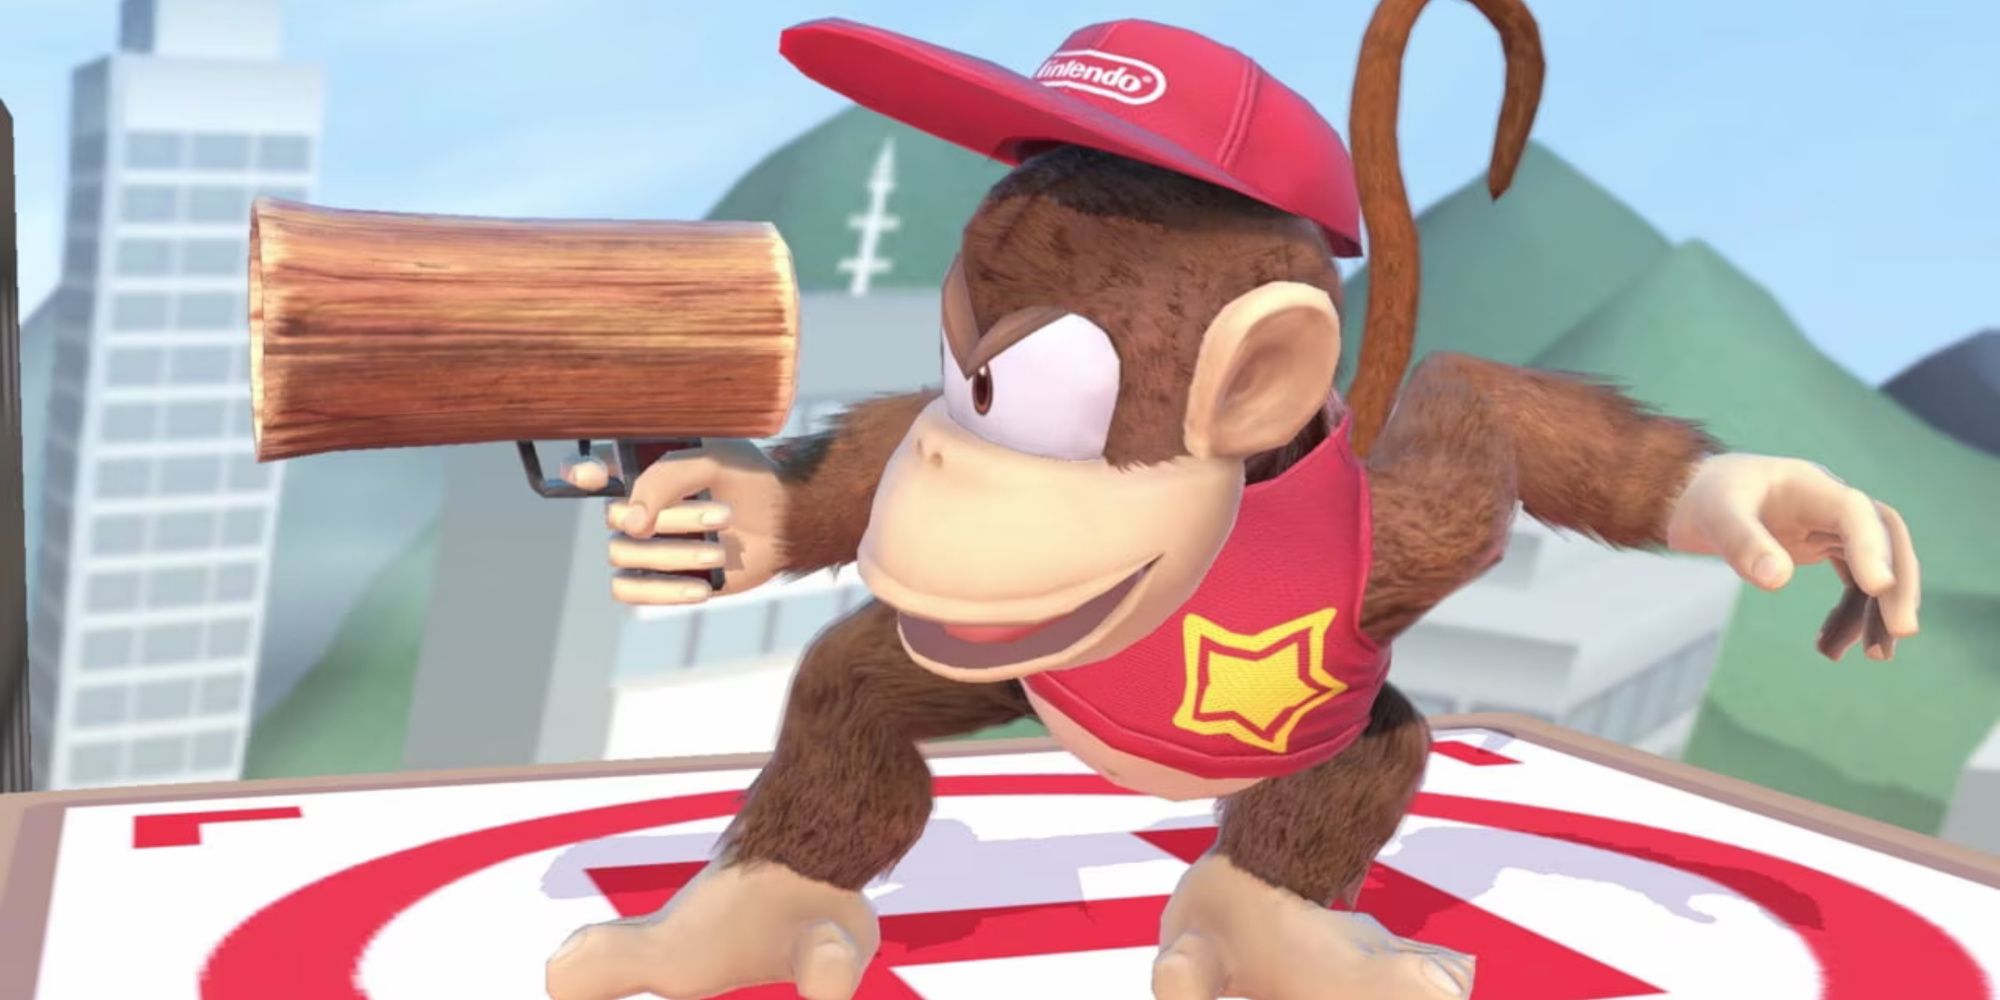 Diddy Kong in Super Smash Bros Ultimate